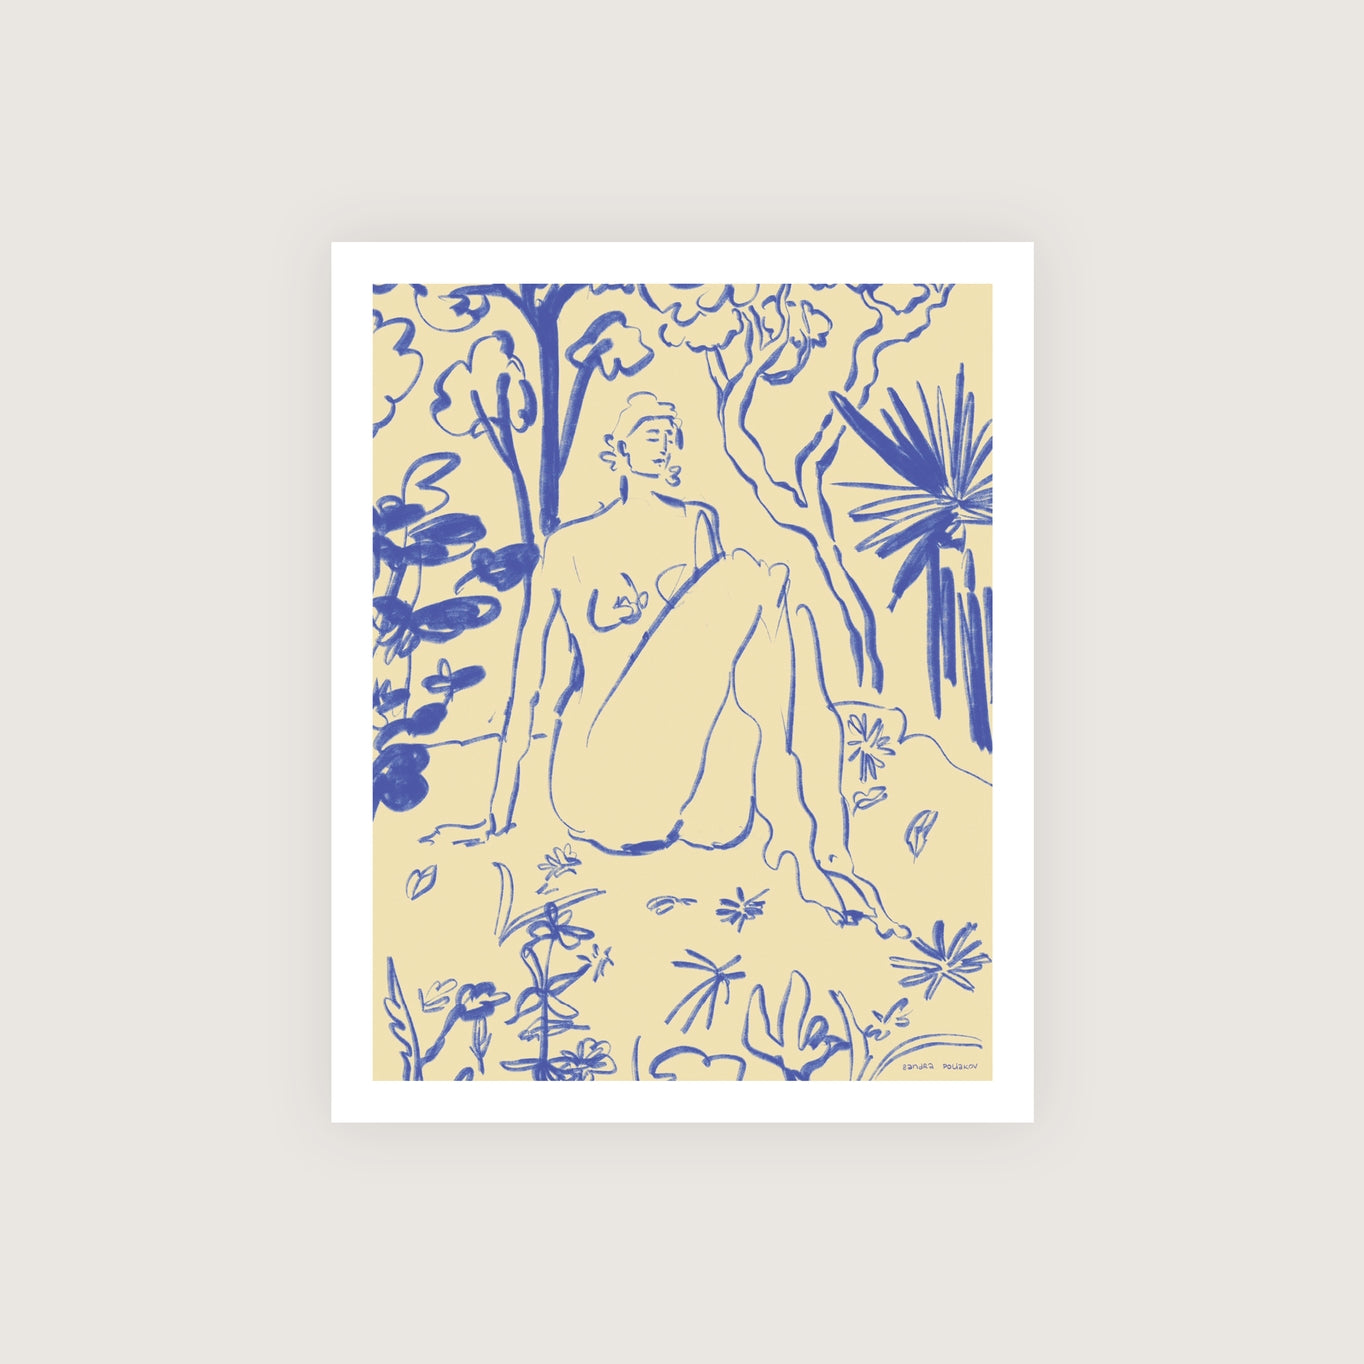 The Blue Lady Print by Someday Studio. Measures 8 x 10", printed on premium paper and packaged in 100% compostable cello sleeve.